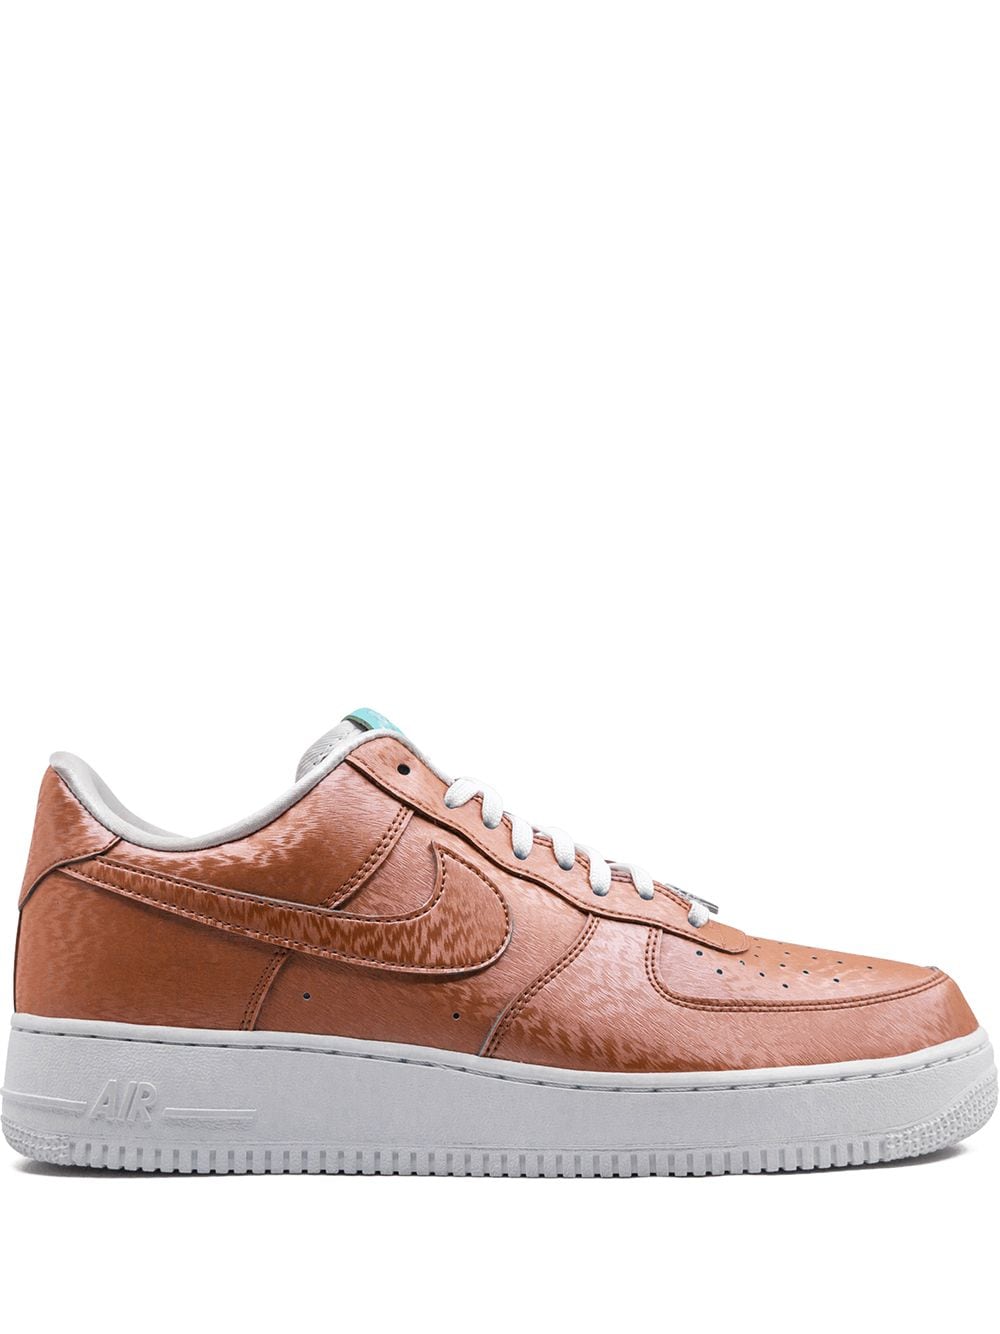 Nike Air Force 1 '07 LV8 QS "Statue Of Liberty" Sneakers Farfetch